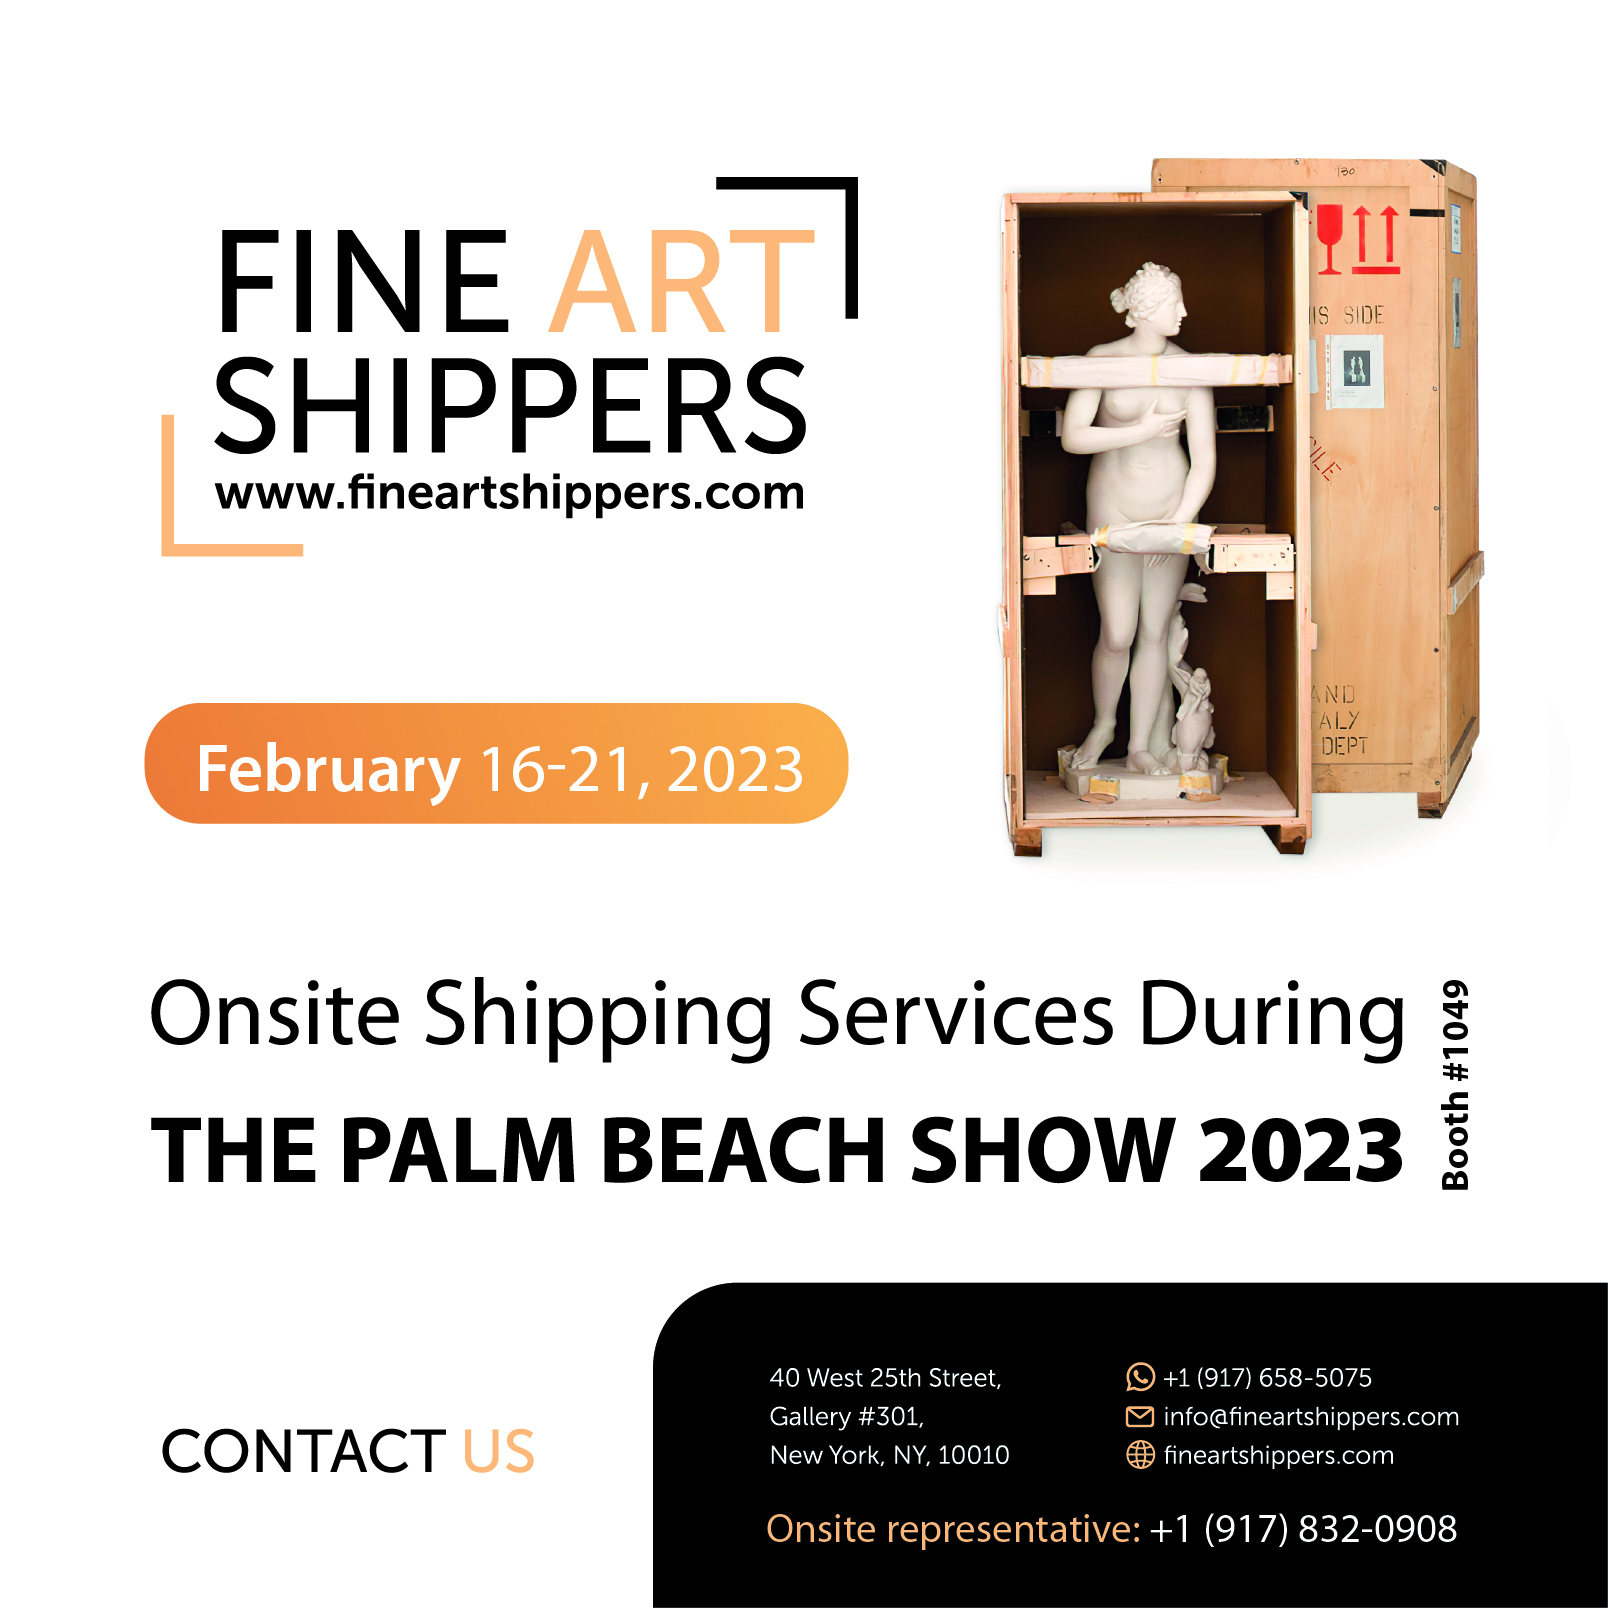 Fine Art Shippers Is an Onsite Shipper at The Palm Beach Show 2023